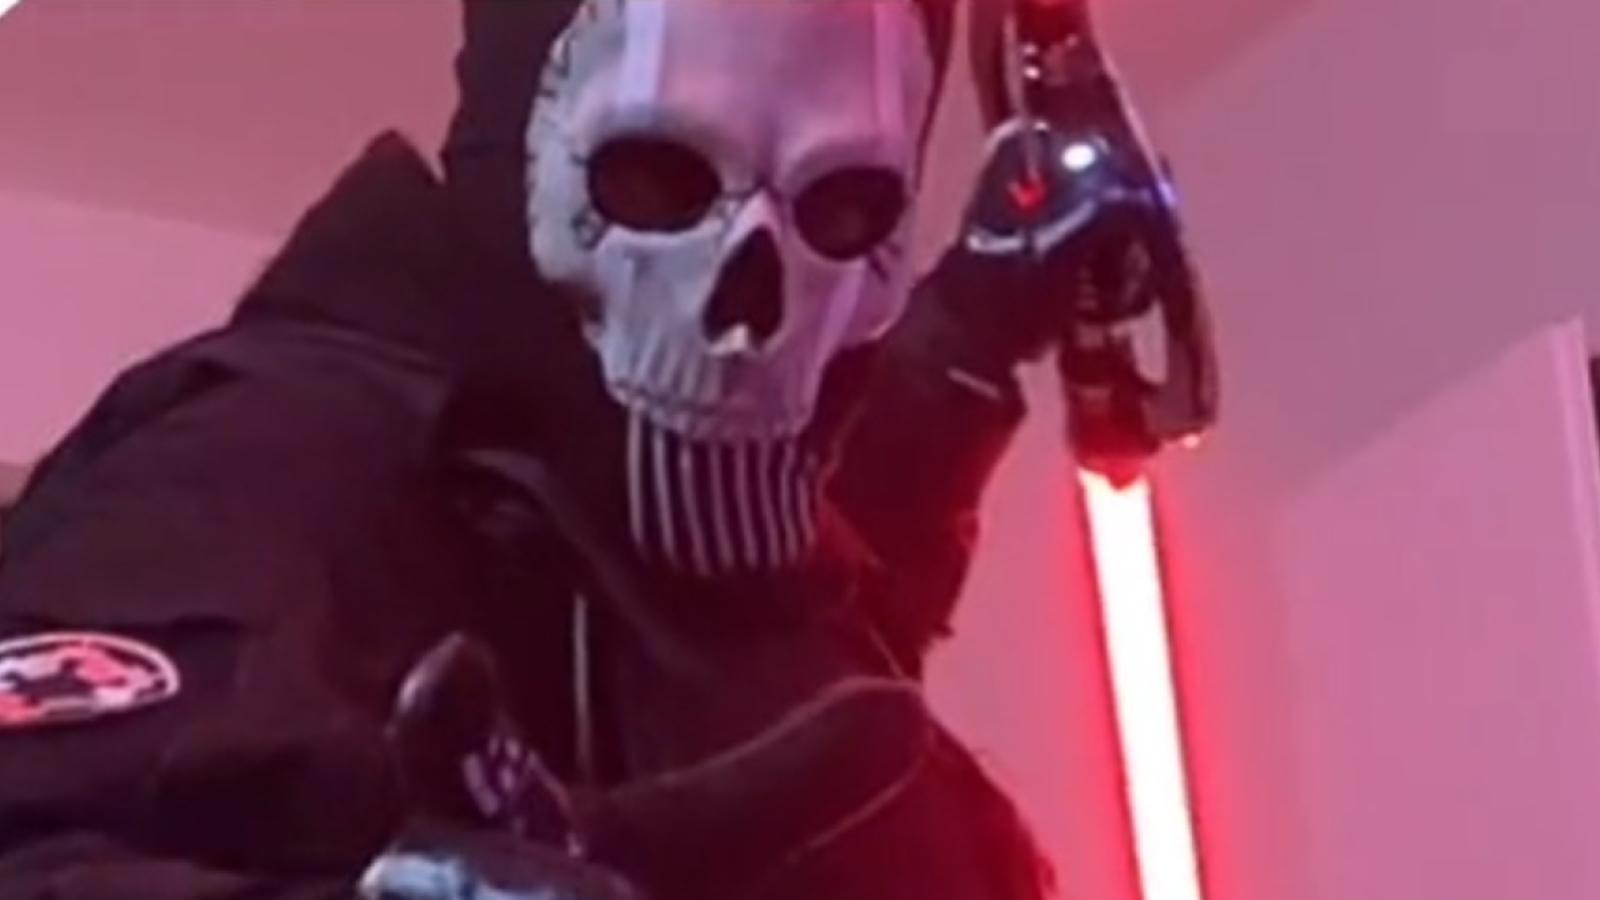 Inquisitor Ghost operator skin petition